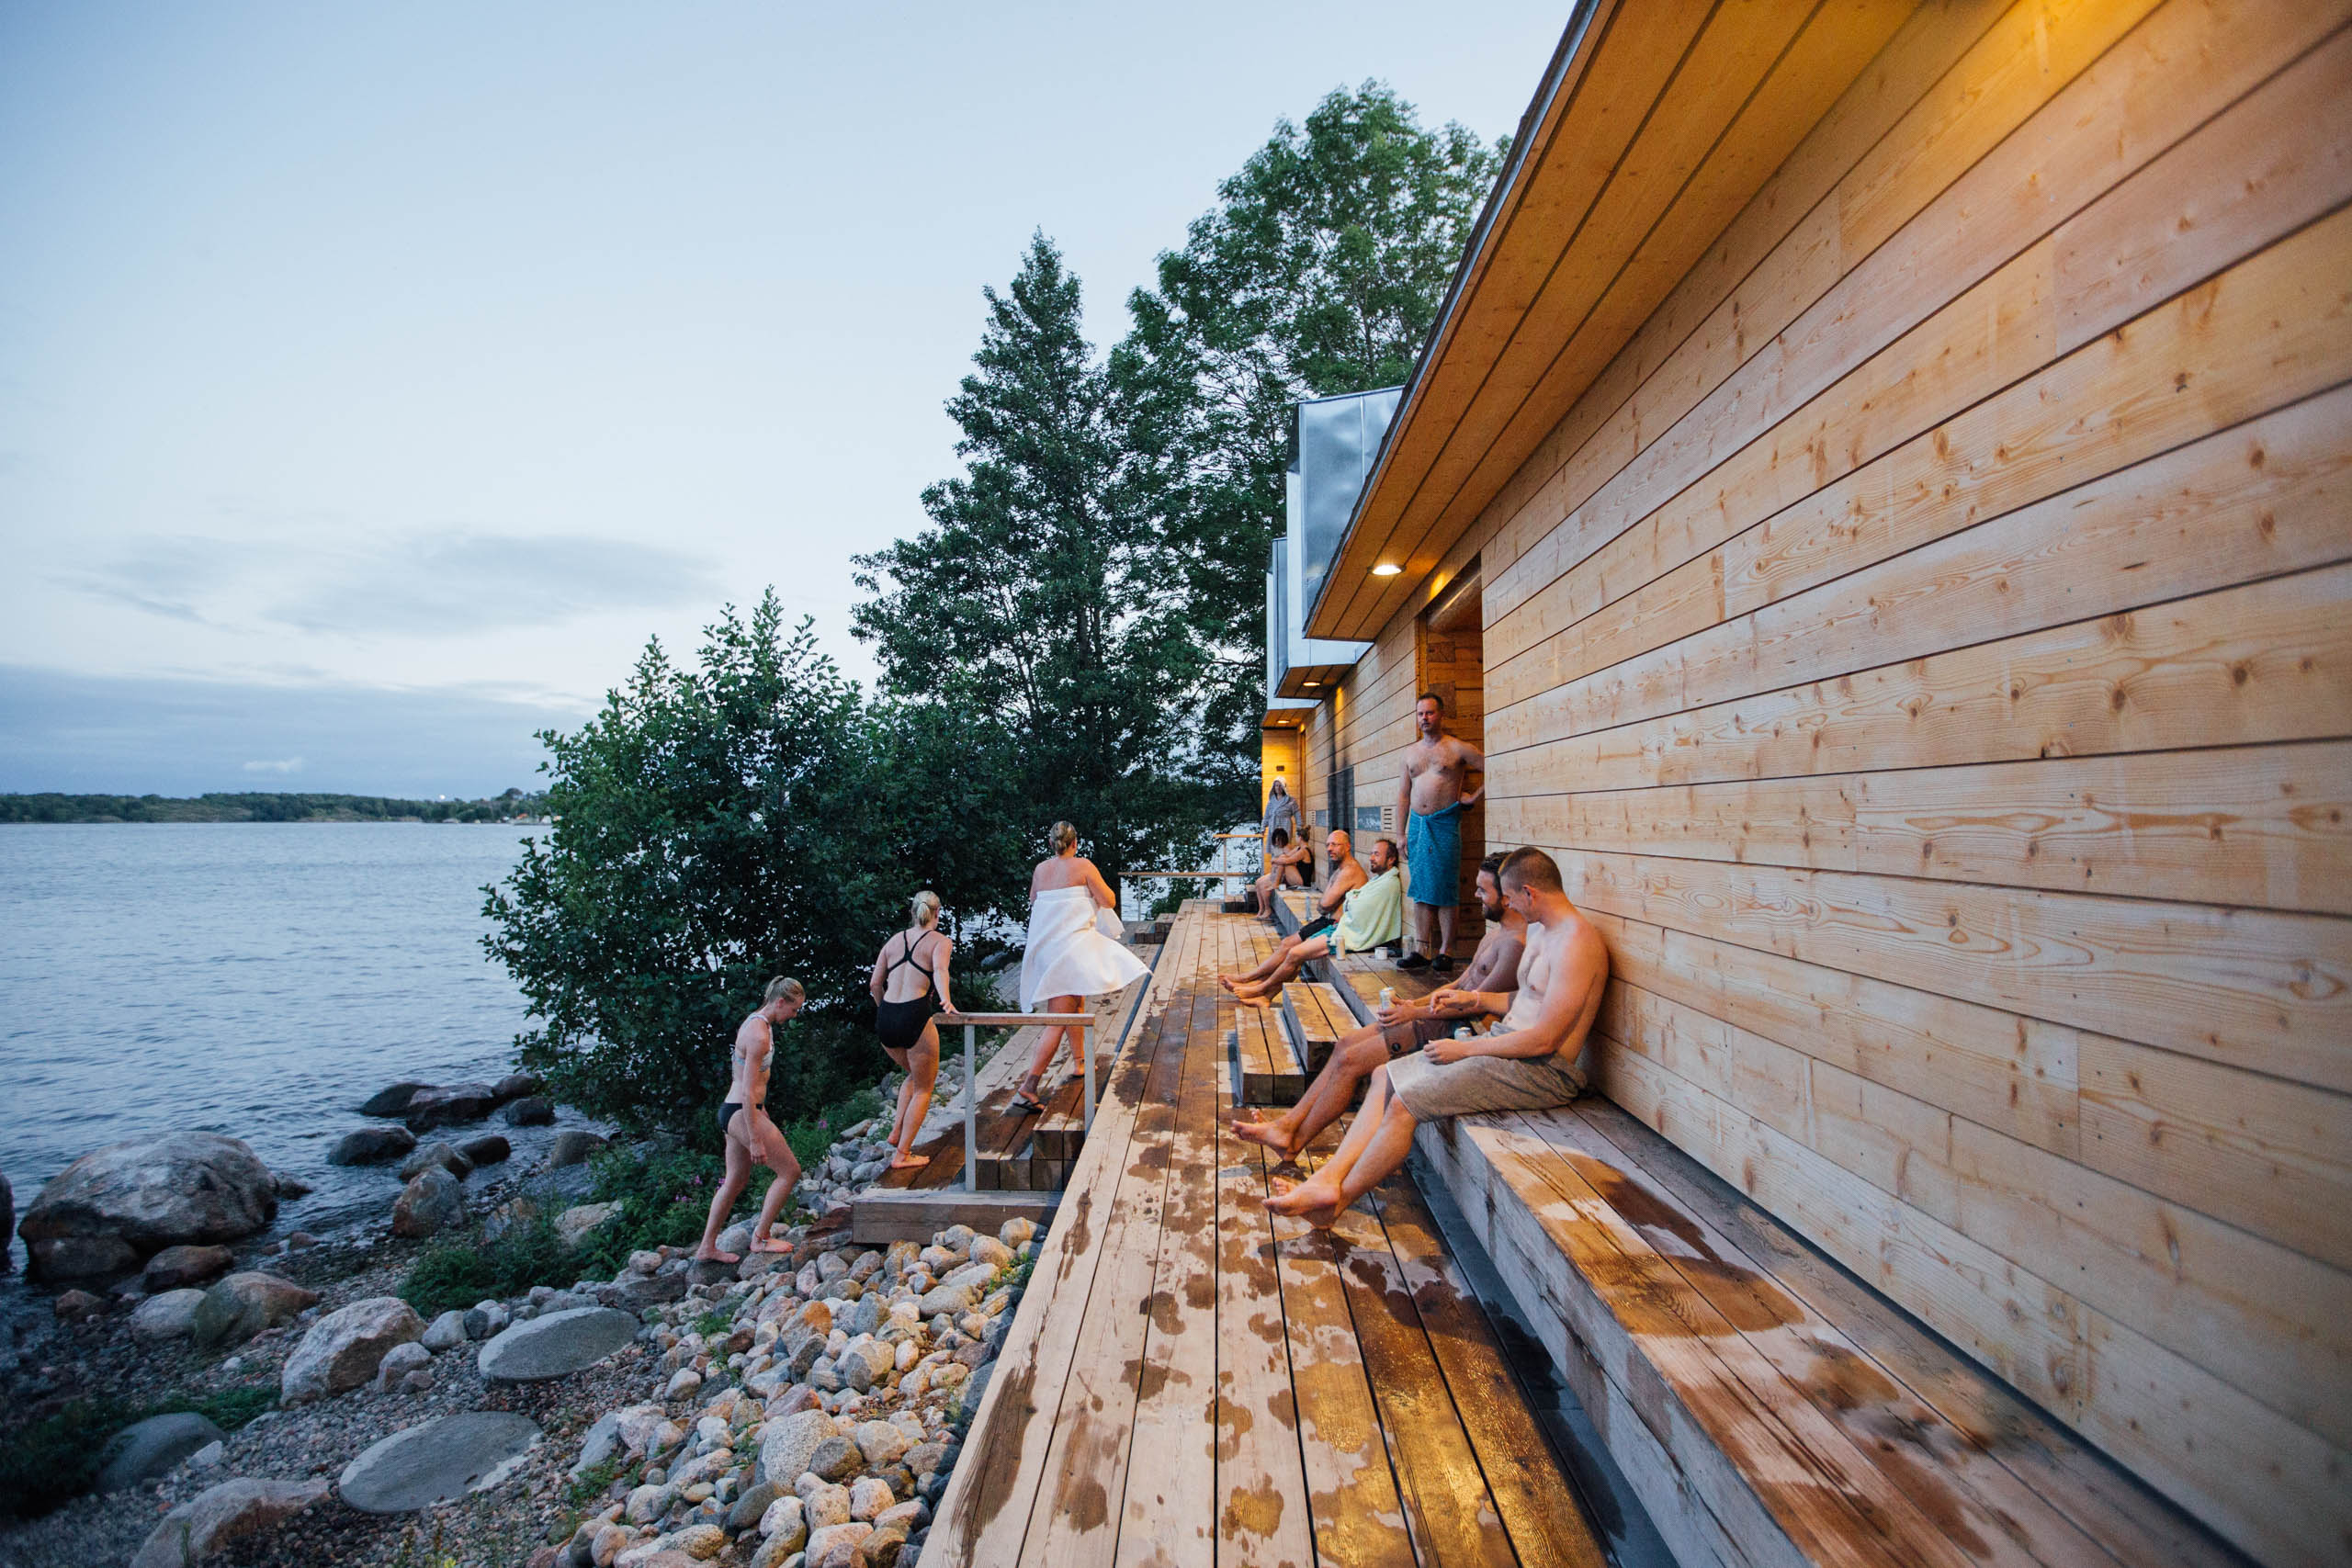 people going to the sauna after a swim in the Baltic sea in the Helsinki archipelago